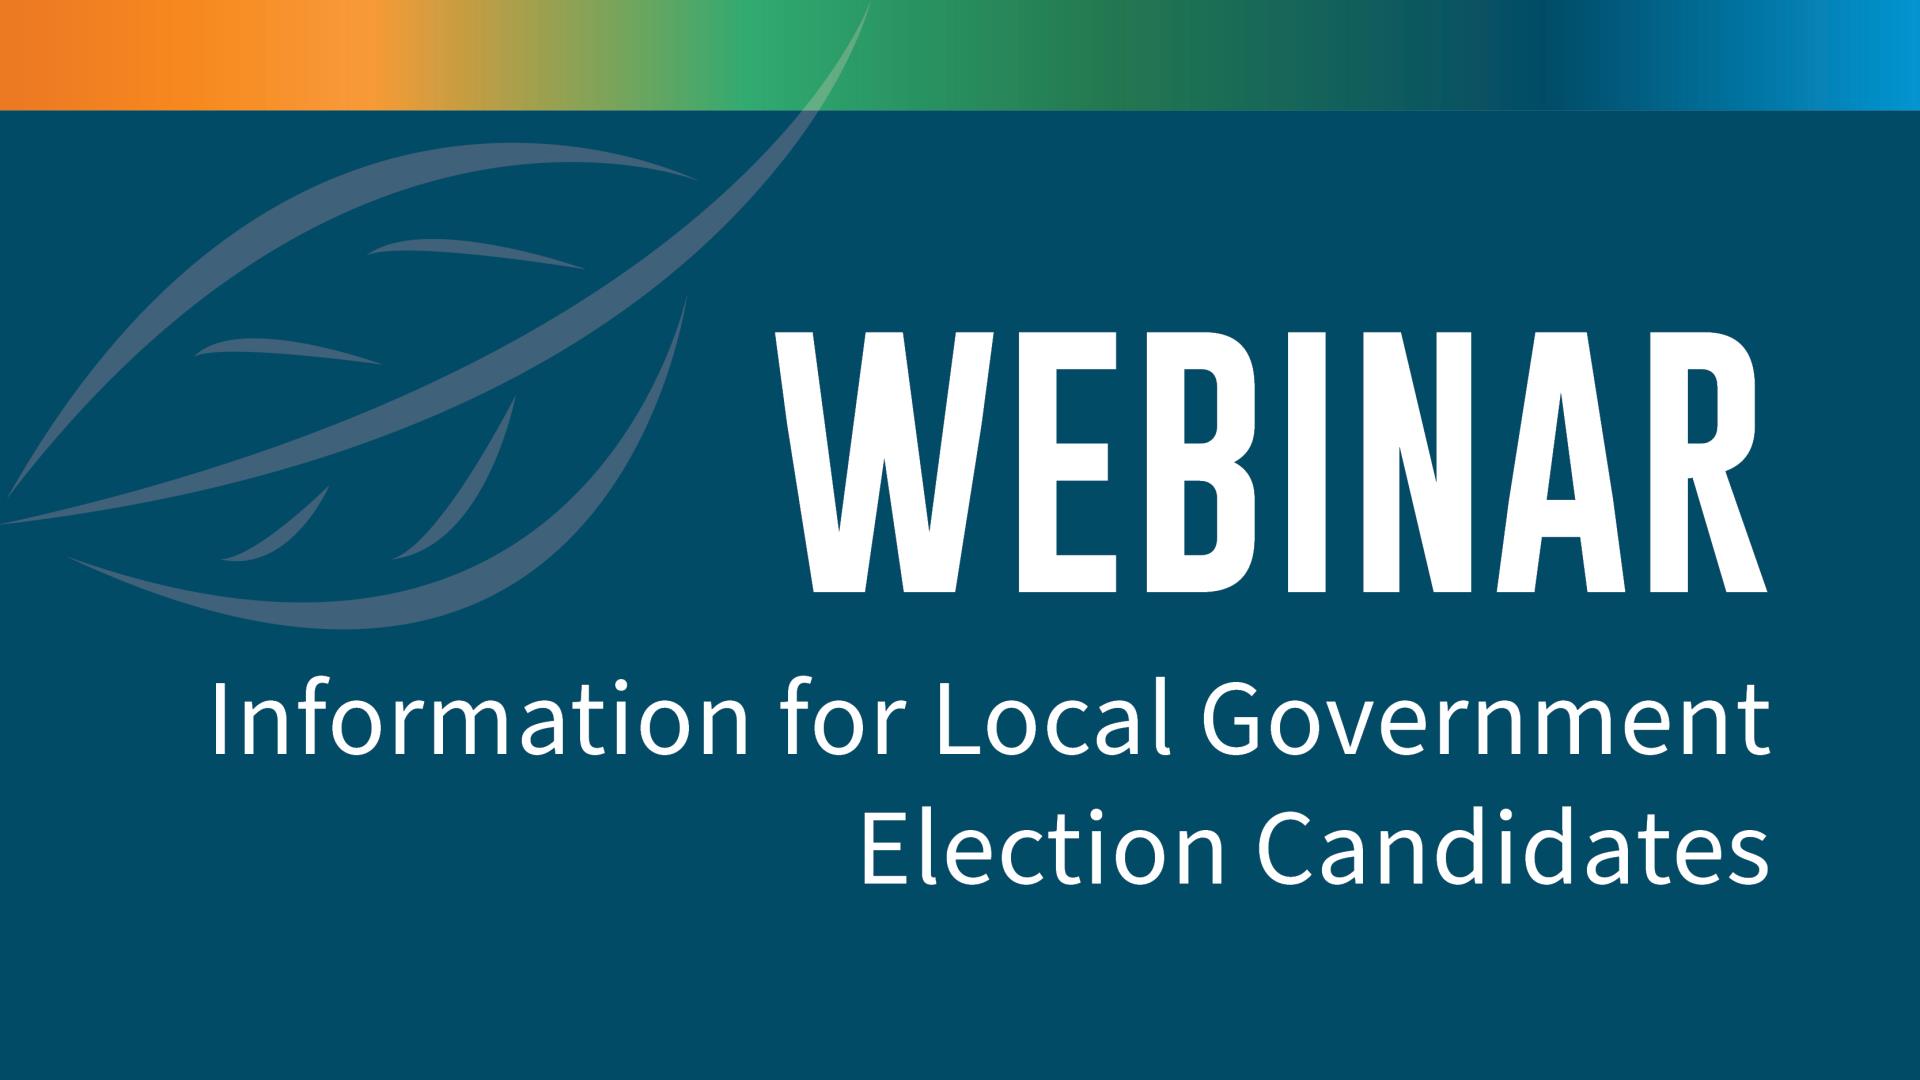 Webinar with Information for Local Government Election Candidates